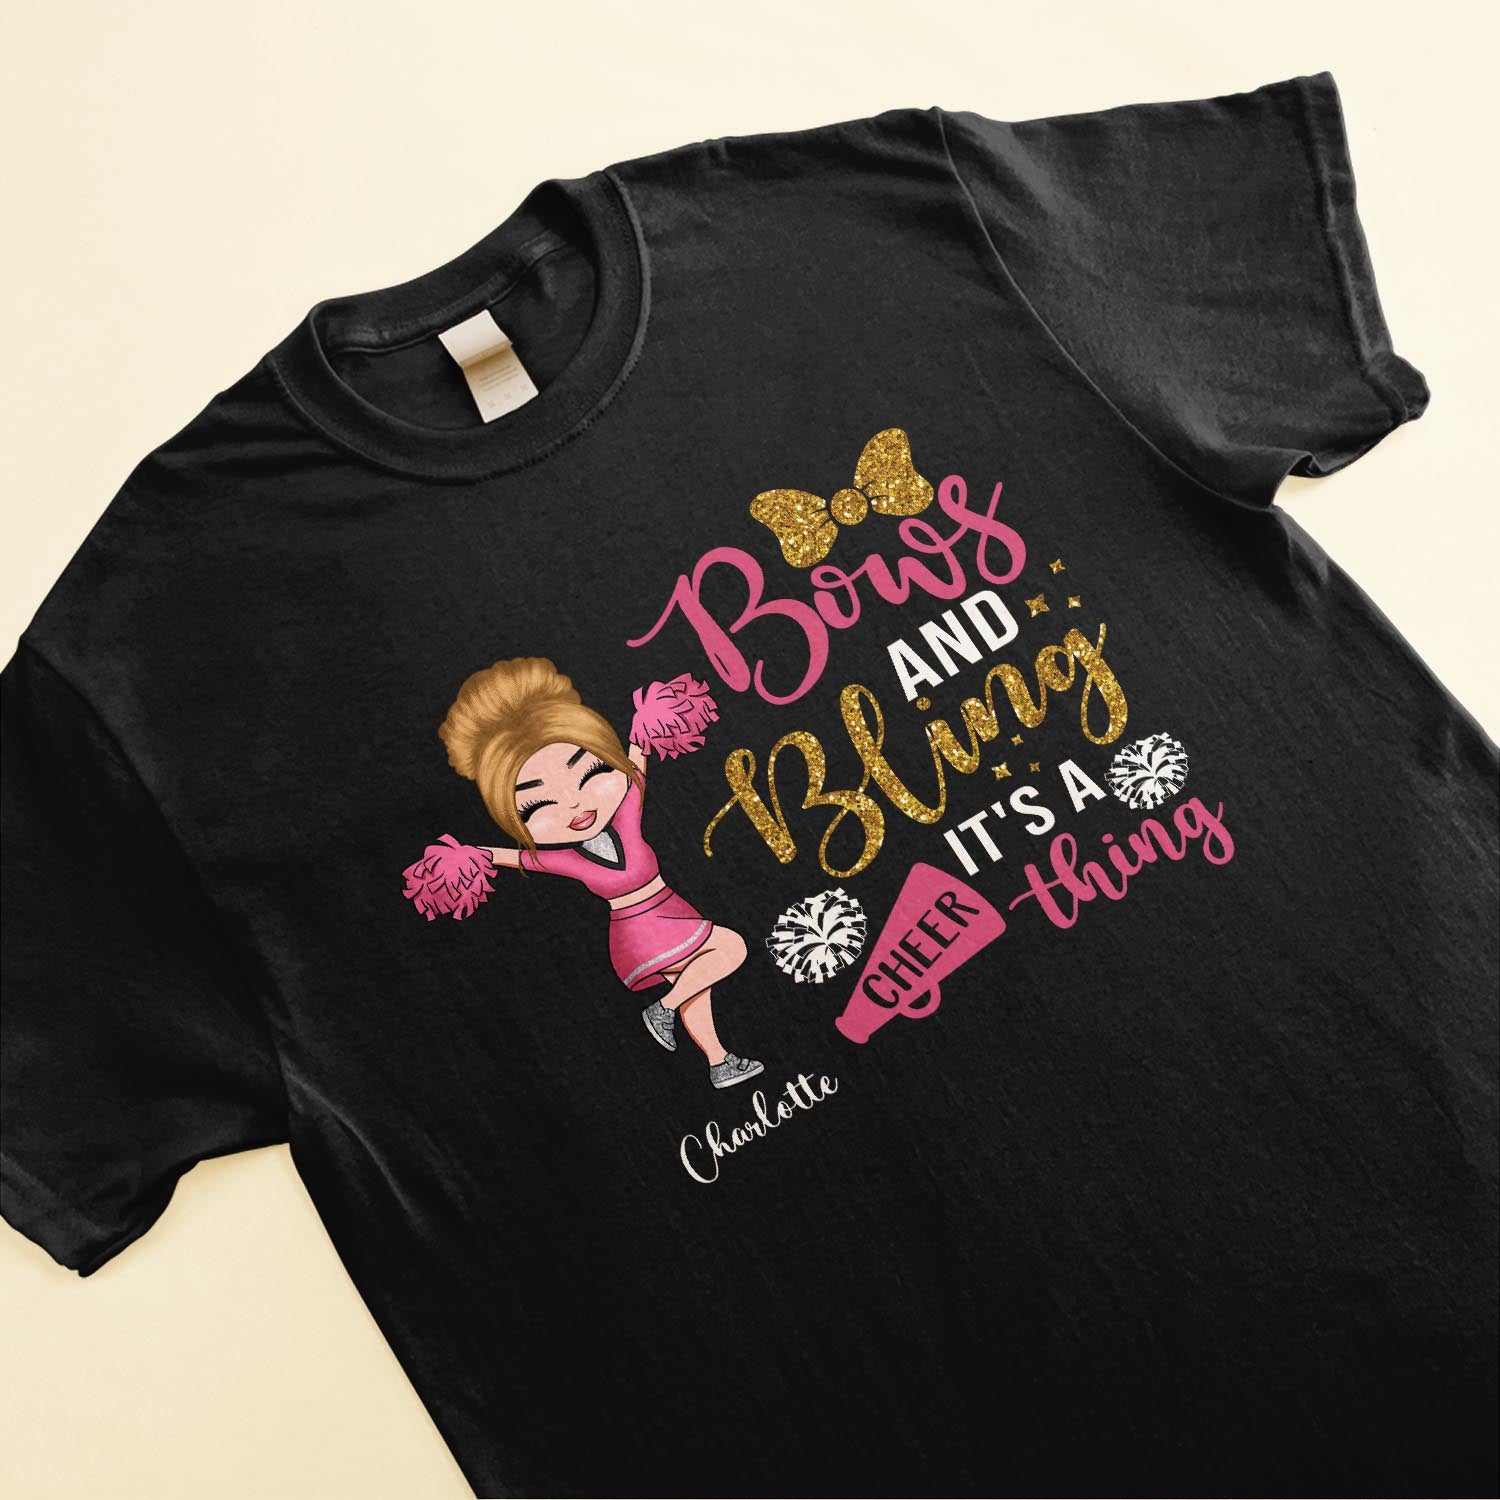 Bows And Bling It's A Cheer Thing - Personalized Shirt - Birthday Gift For Cheerleaders 